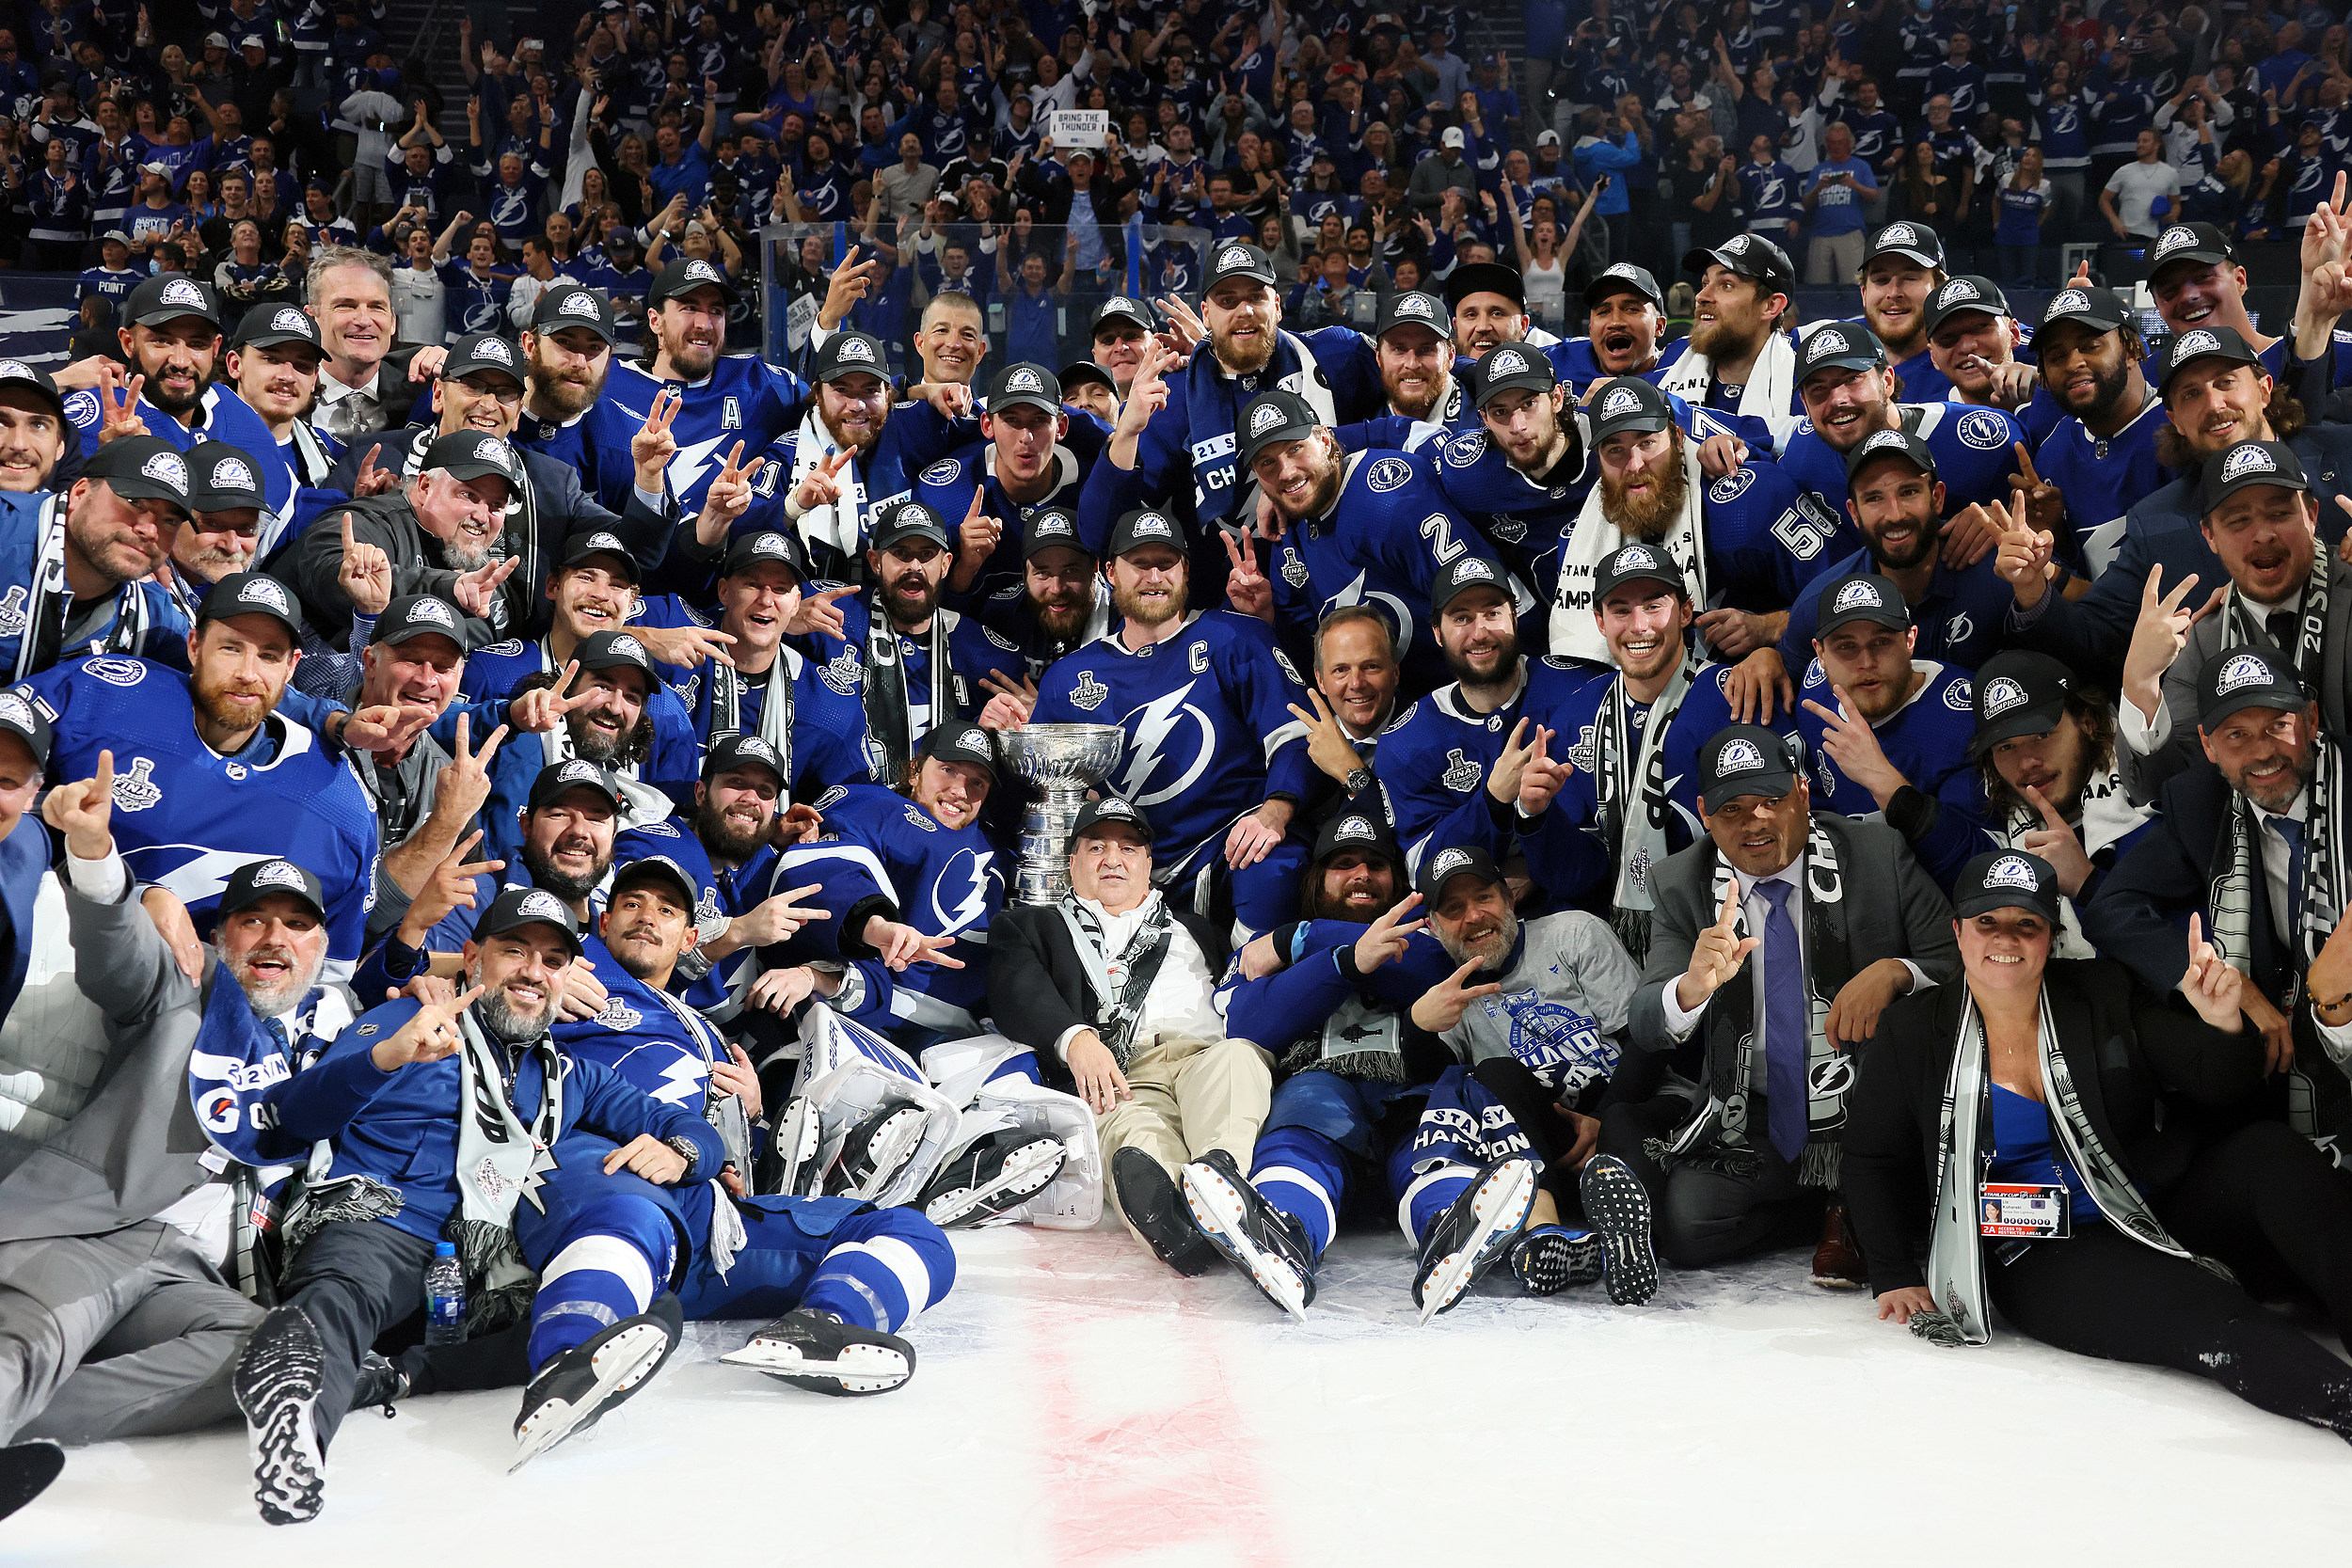 Two fresh takes on Lightning's win in Game 7 of 2004 Stanley Cup Final